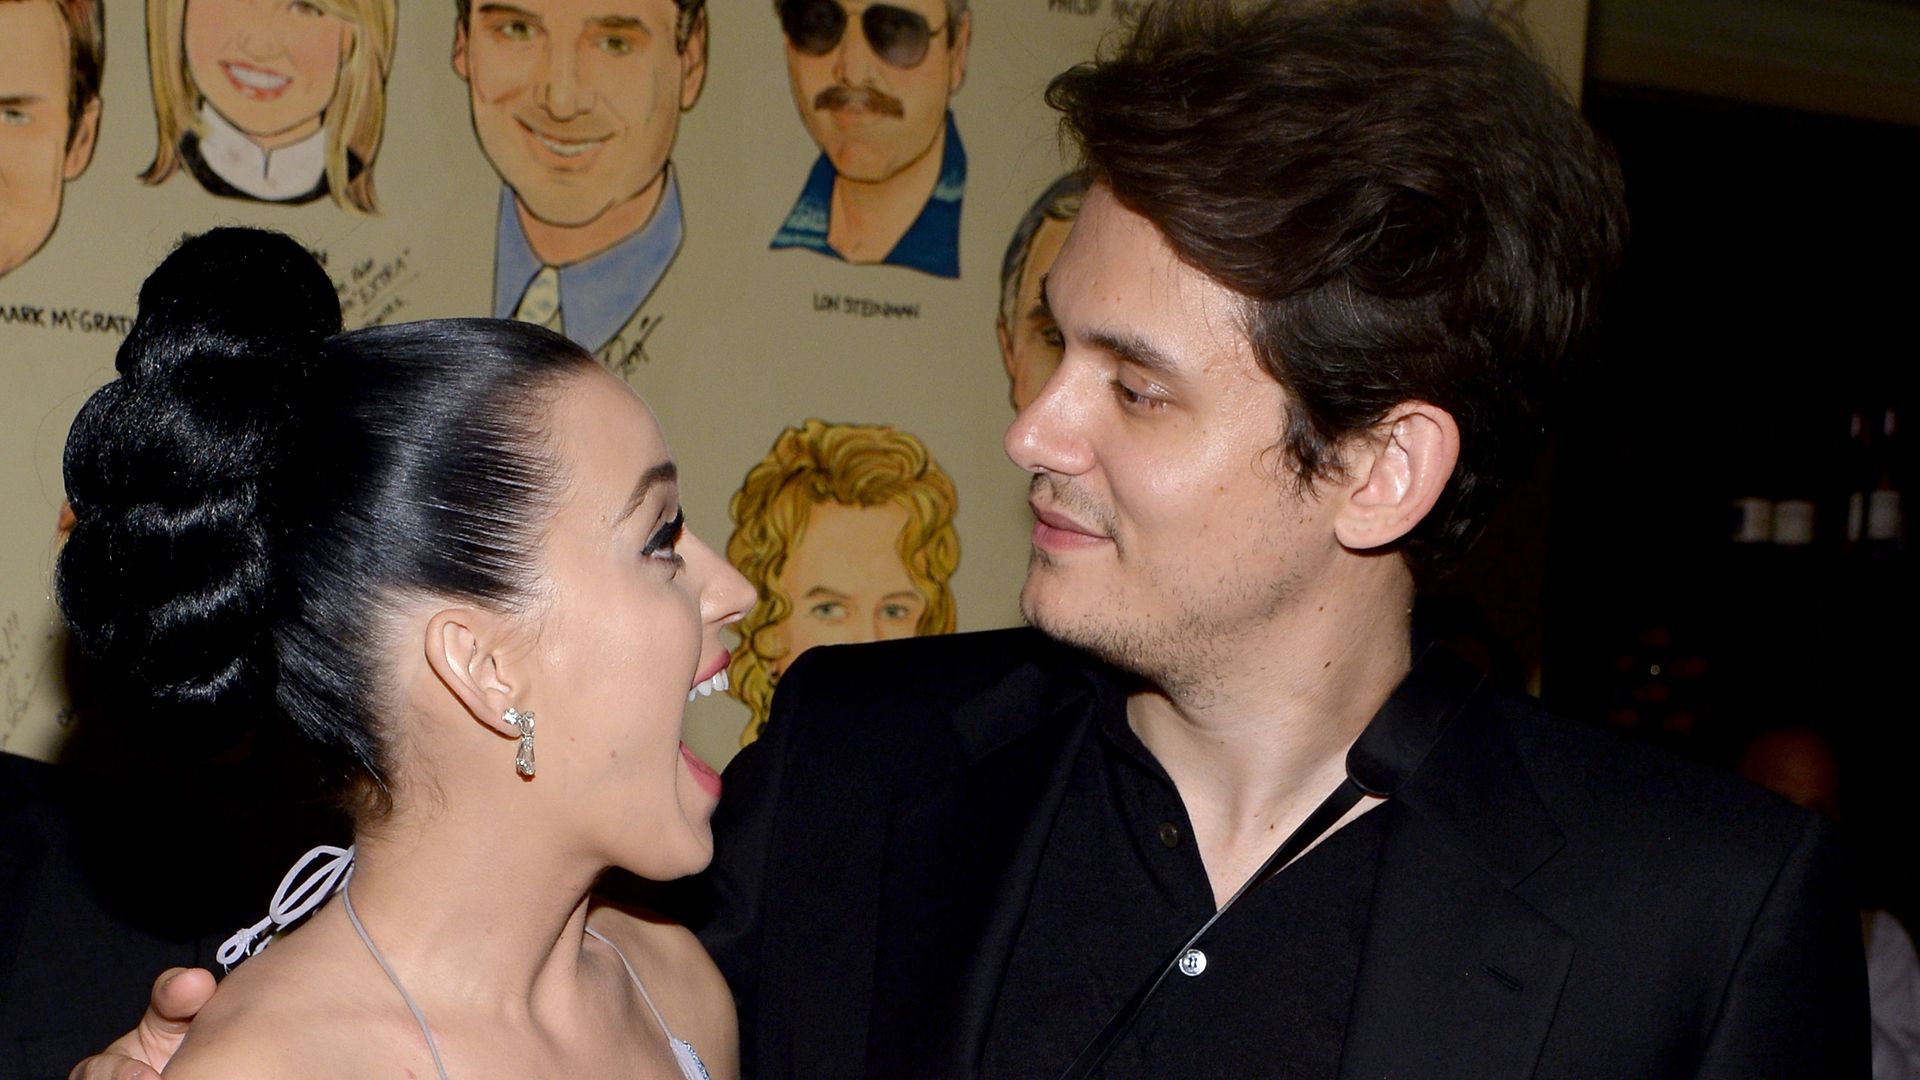 Katy Perry and John Mayer joking together